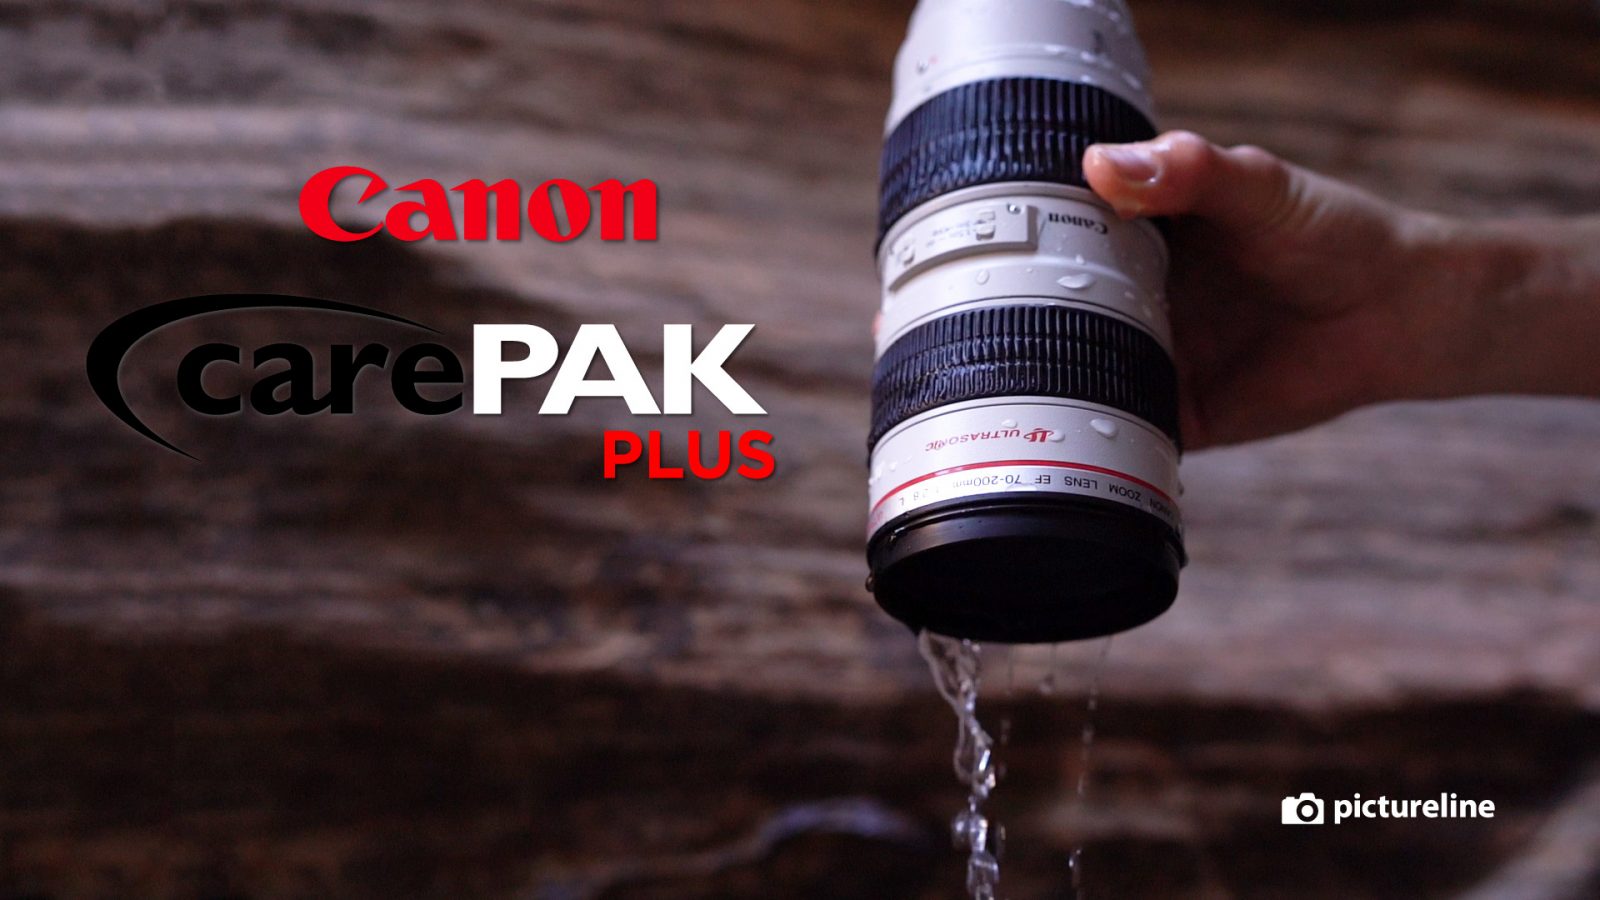 Taking Care of Your Gear with the Canon Carepak